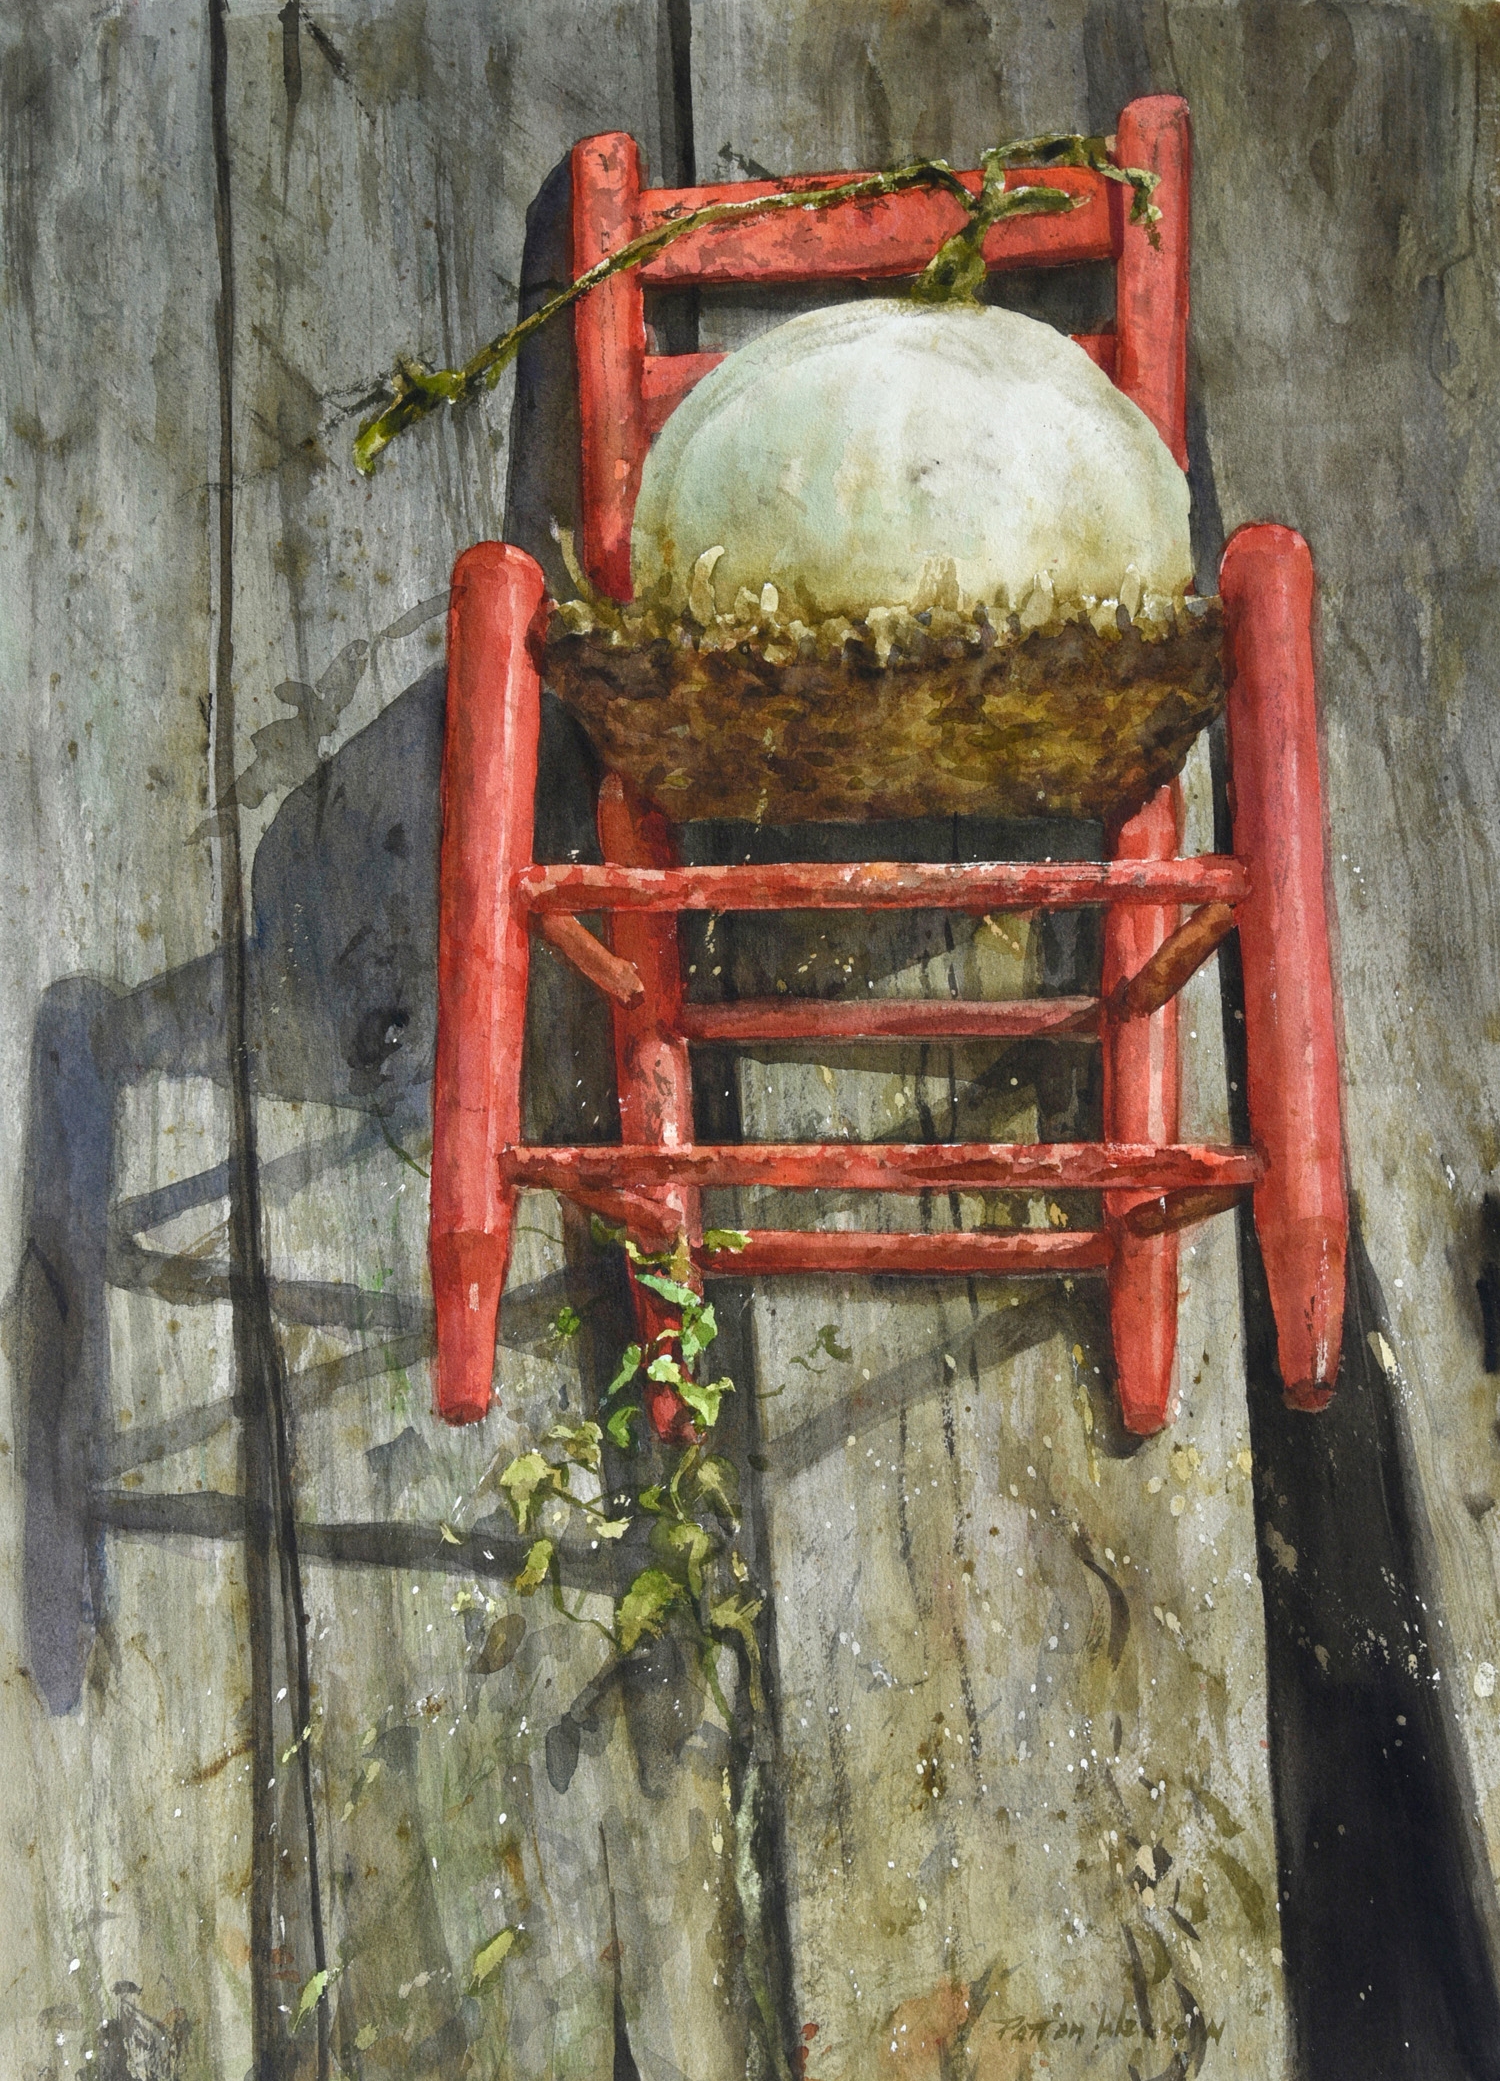  "RED CHAIR" Watercolor 22.25 x 18 